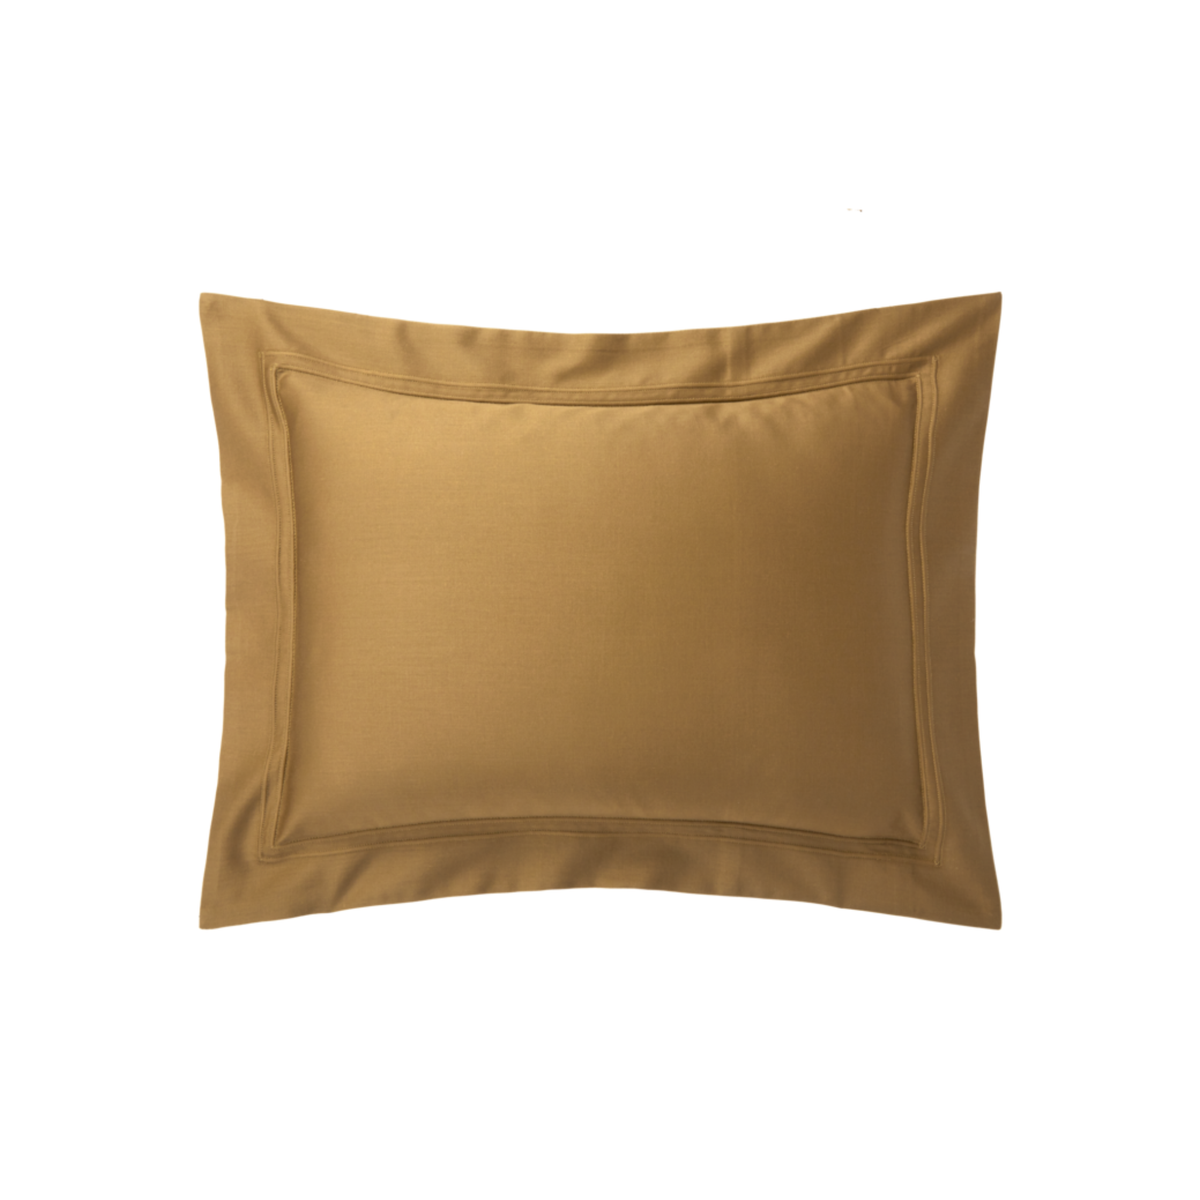 Sham of Yves Delorme Triomphe Bedding in Bronze Color